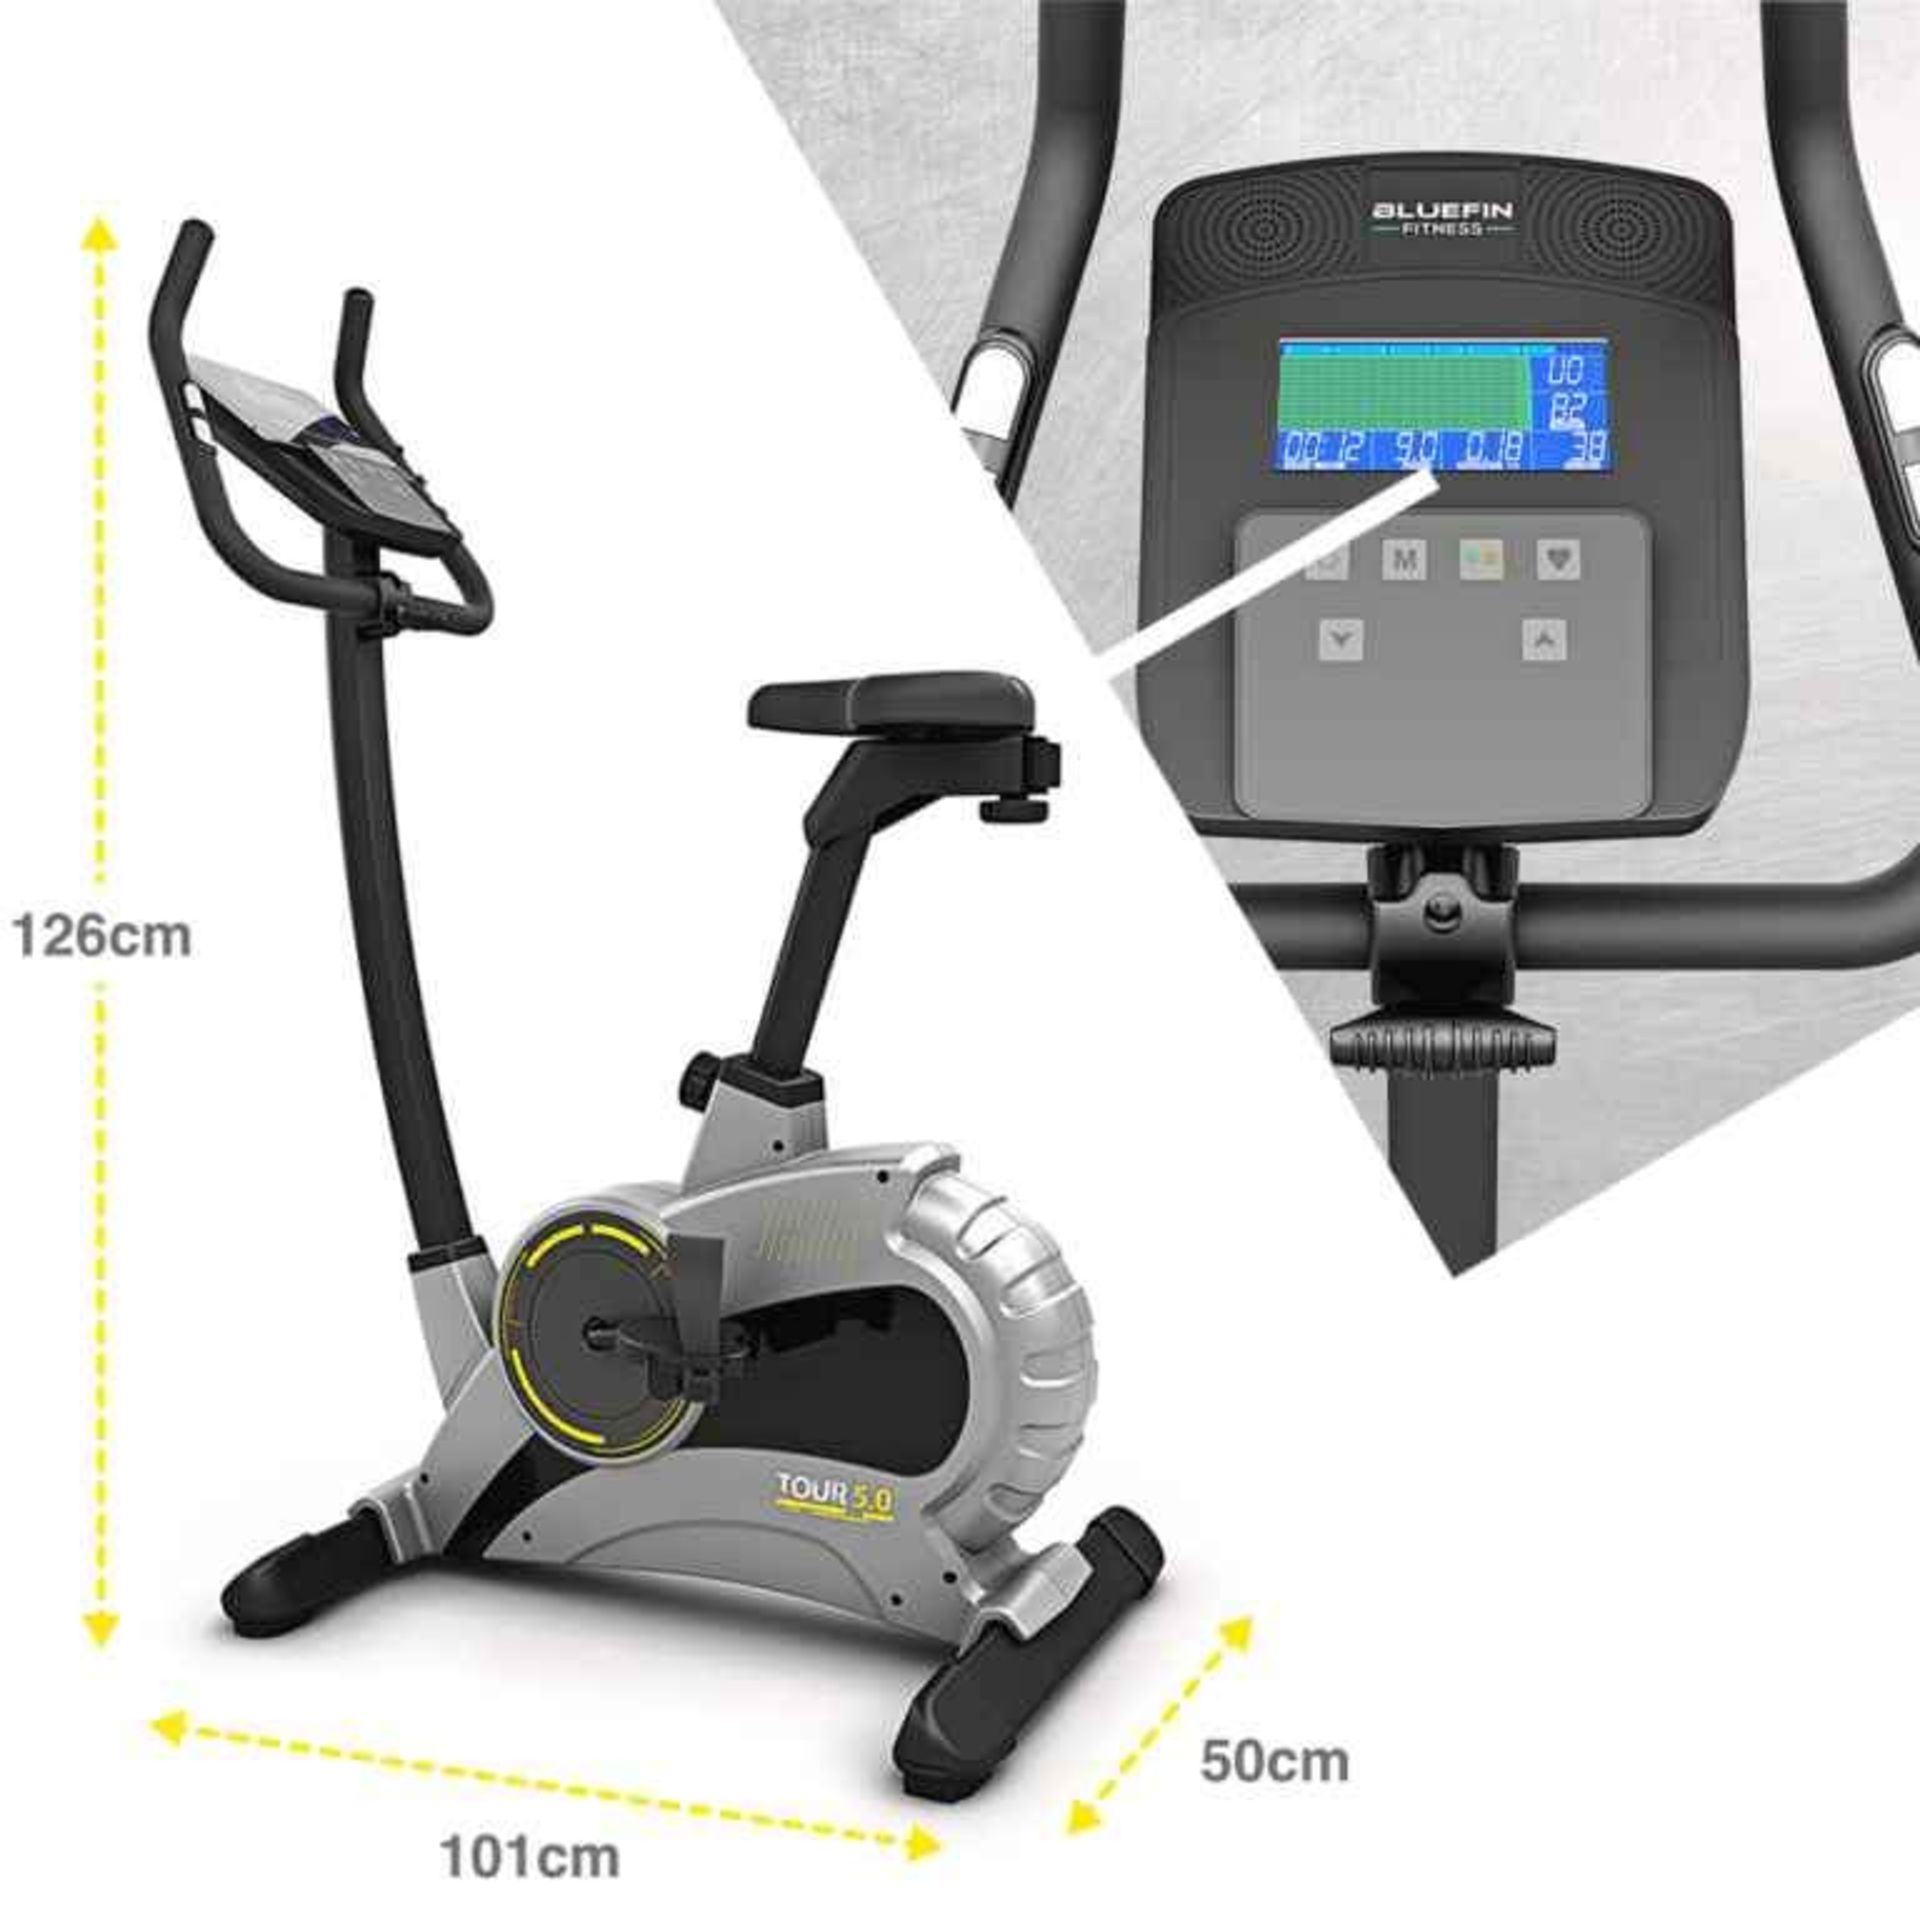 BLUEFIN FITNESS TOUR 5.0 RESISTANCE EXERCISE BIKE RRP £349.00